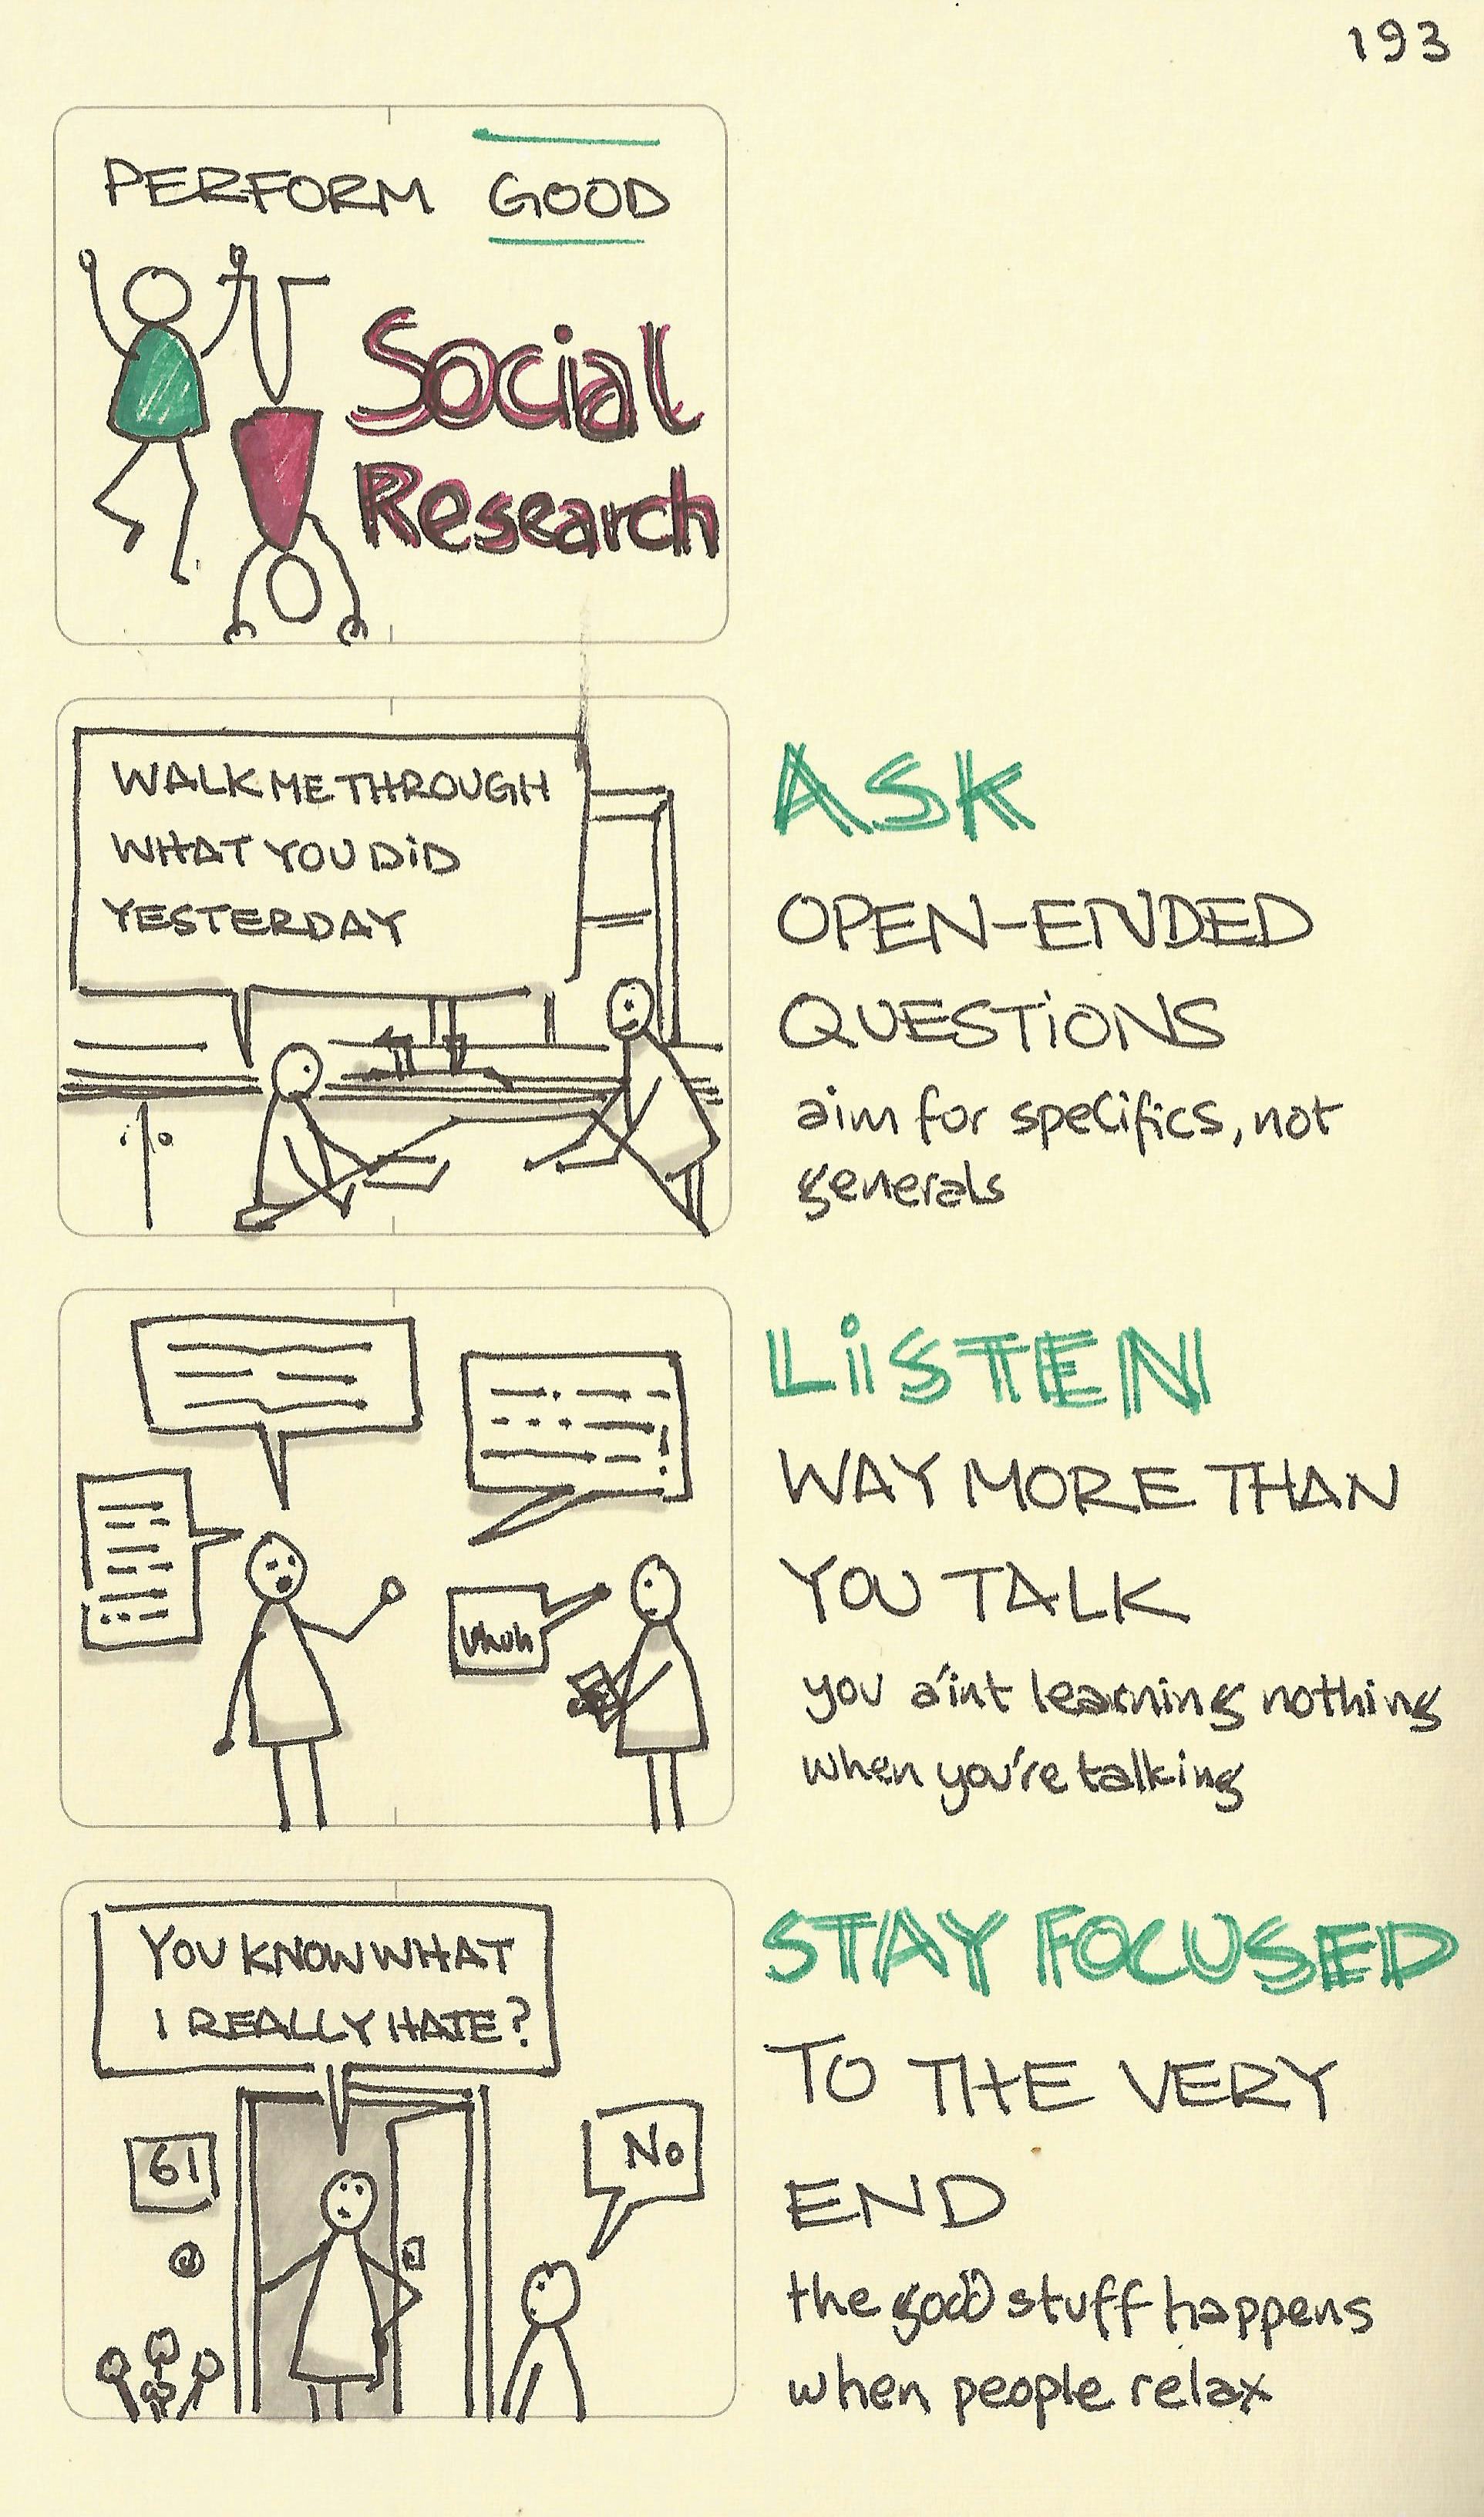 3 visuals explaining: Ask open-ended questions, Listen way more than you talk, and Stay focused to the very end